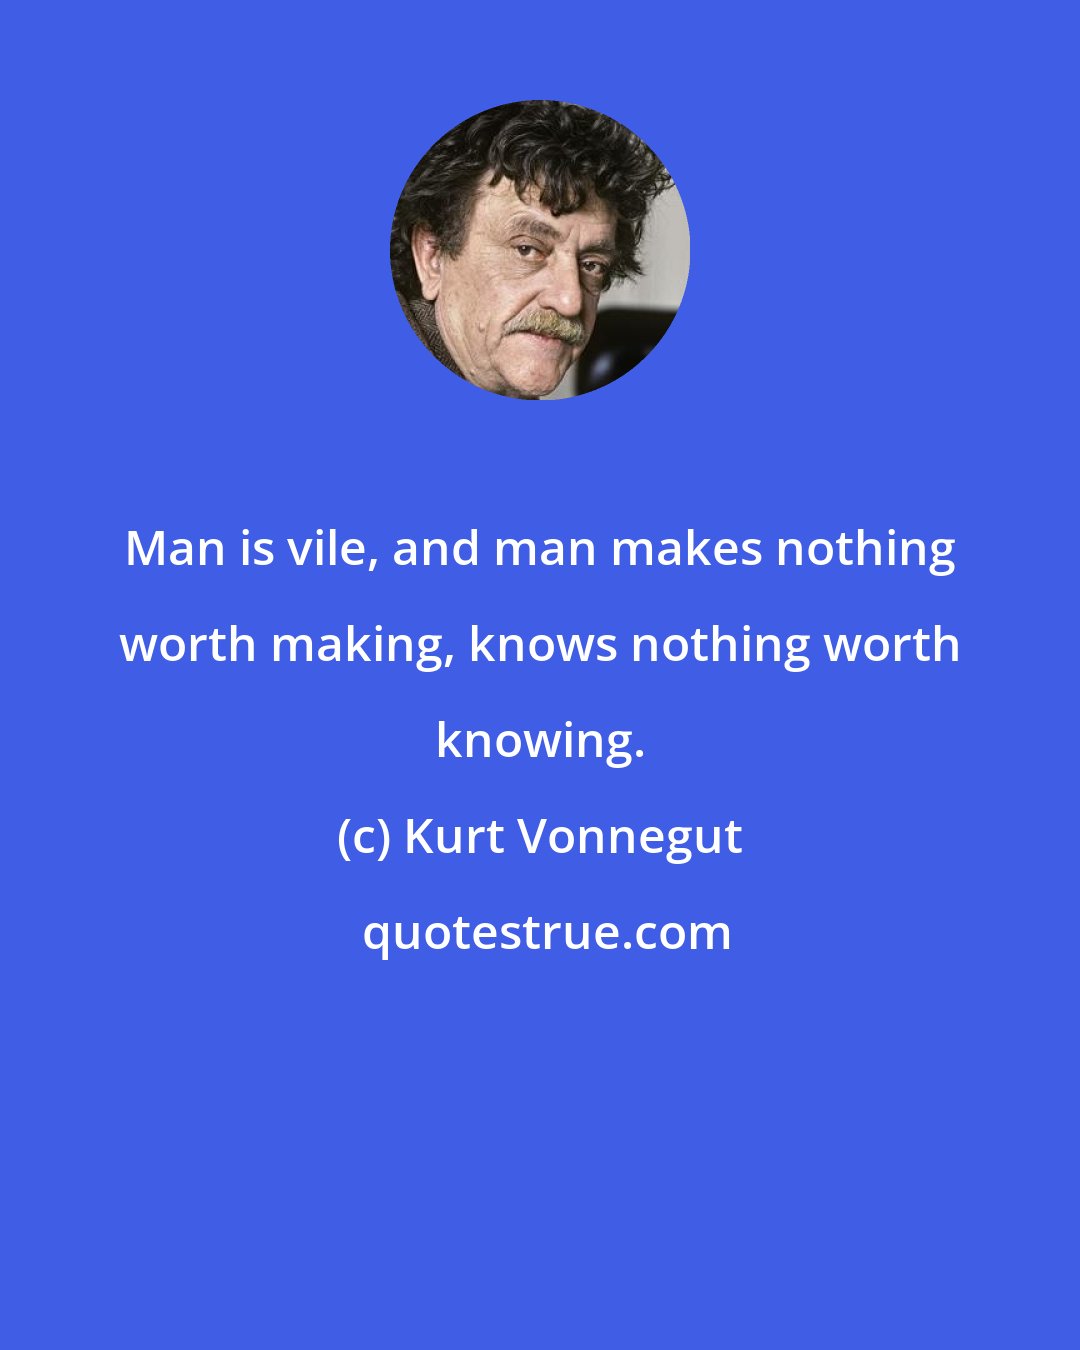 Kurt Vonnegut: Man is vile, and man makes nothing worth making, knows nothing worth knowing.